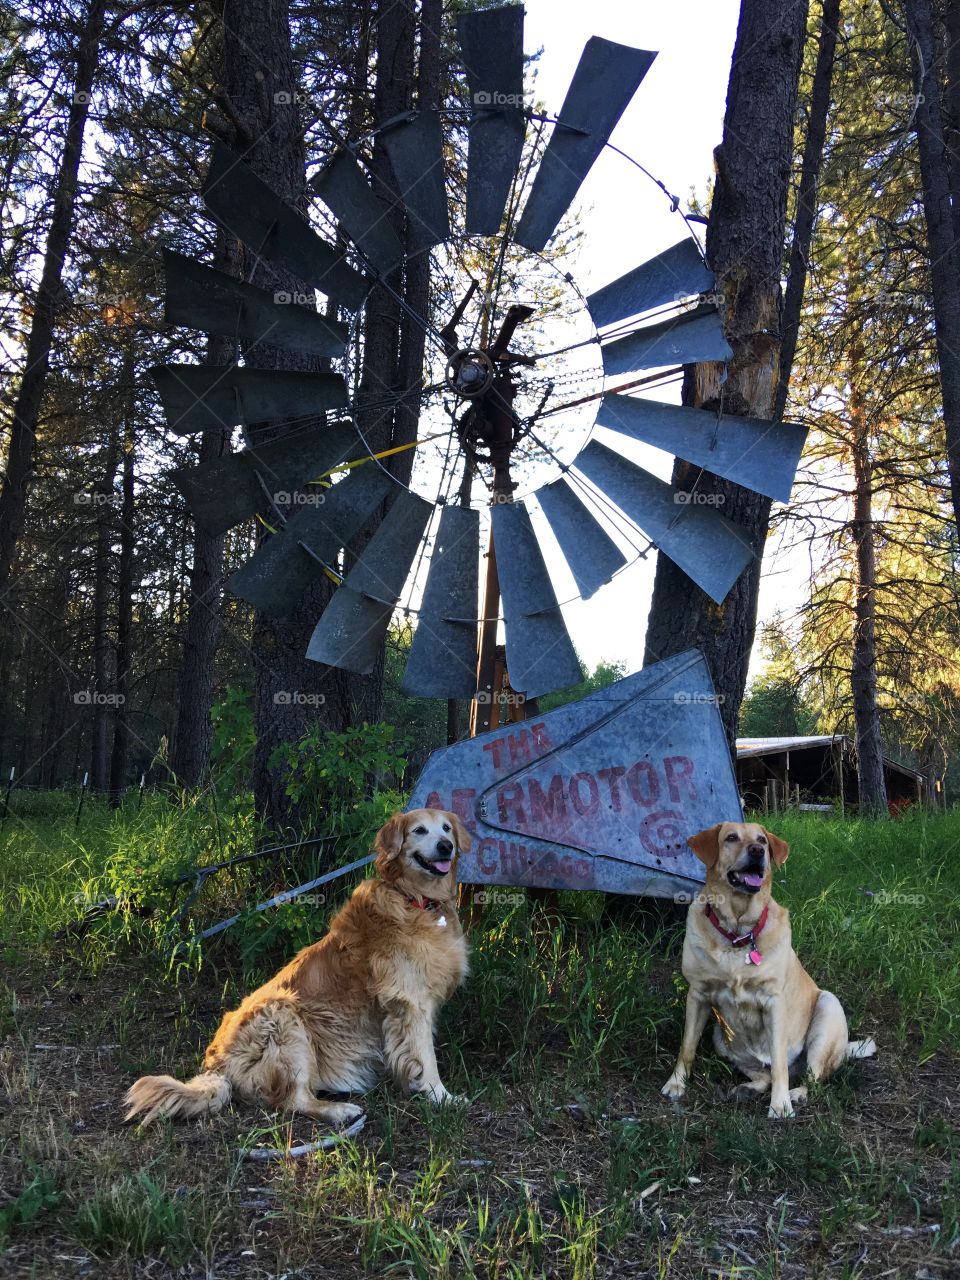 This photo features two retrievers sitting on either side of a vintage windmill and smiling for the camera.